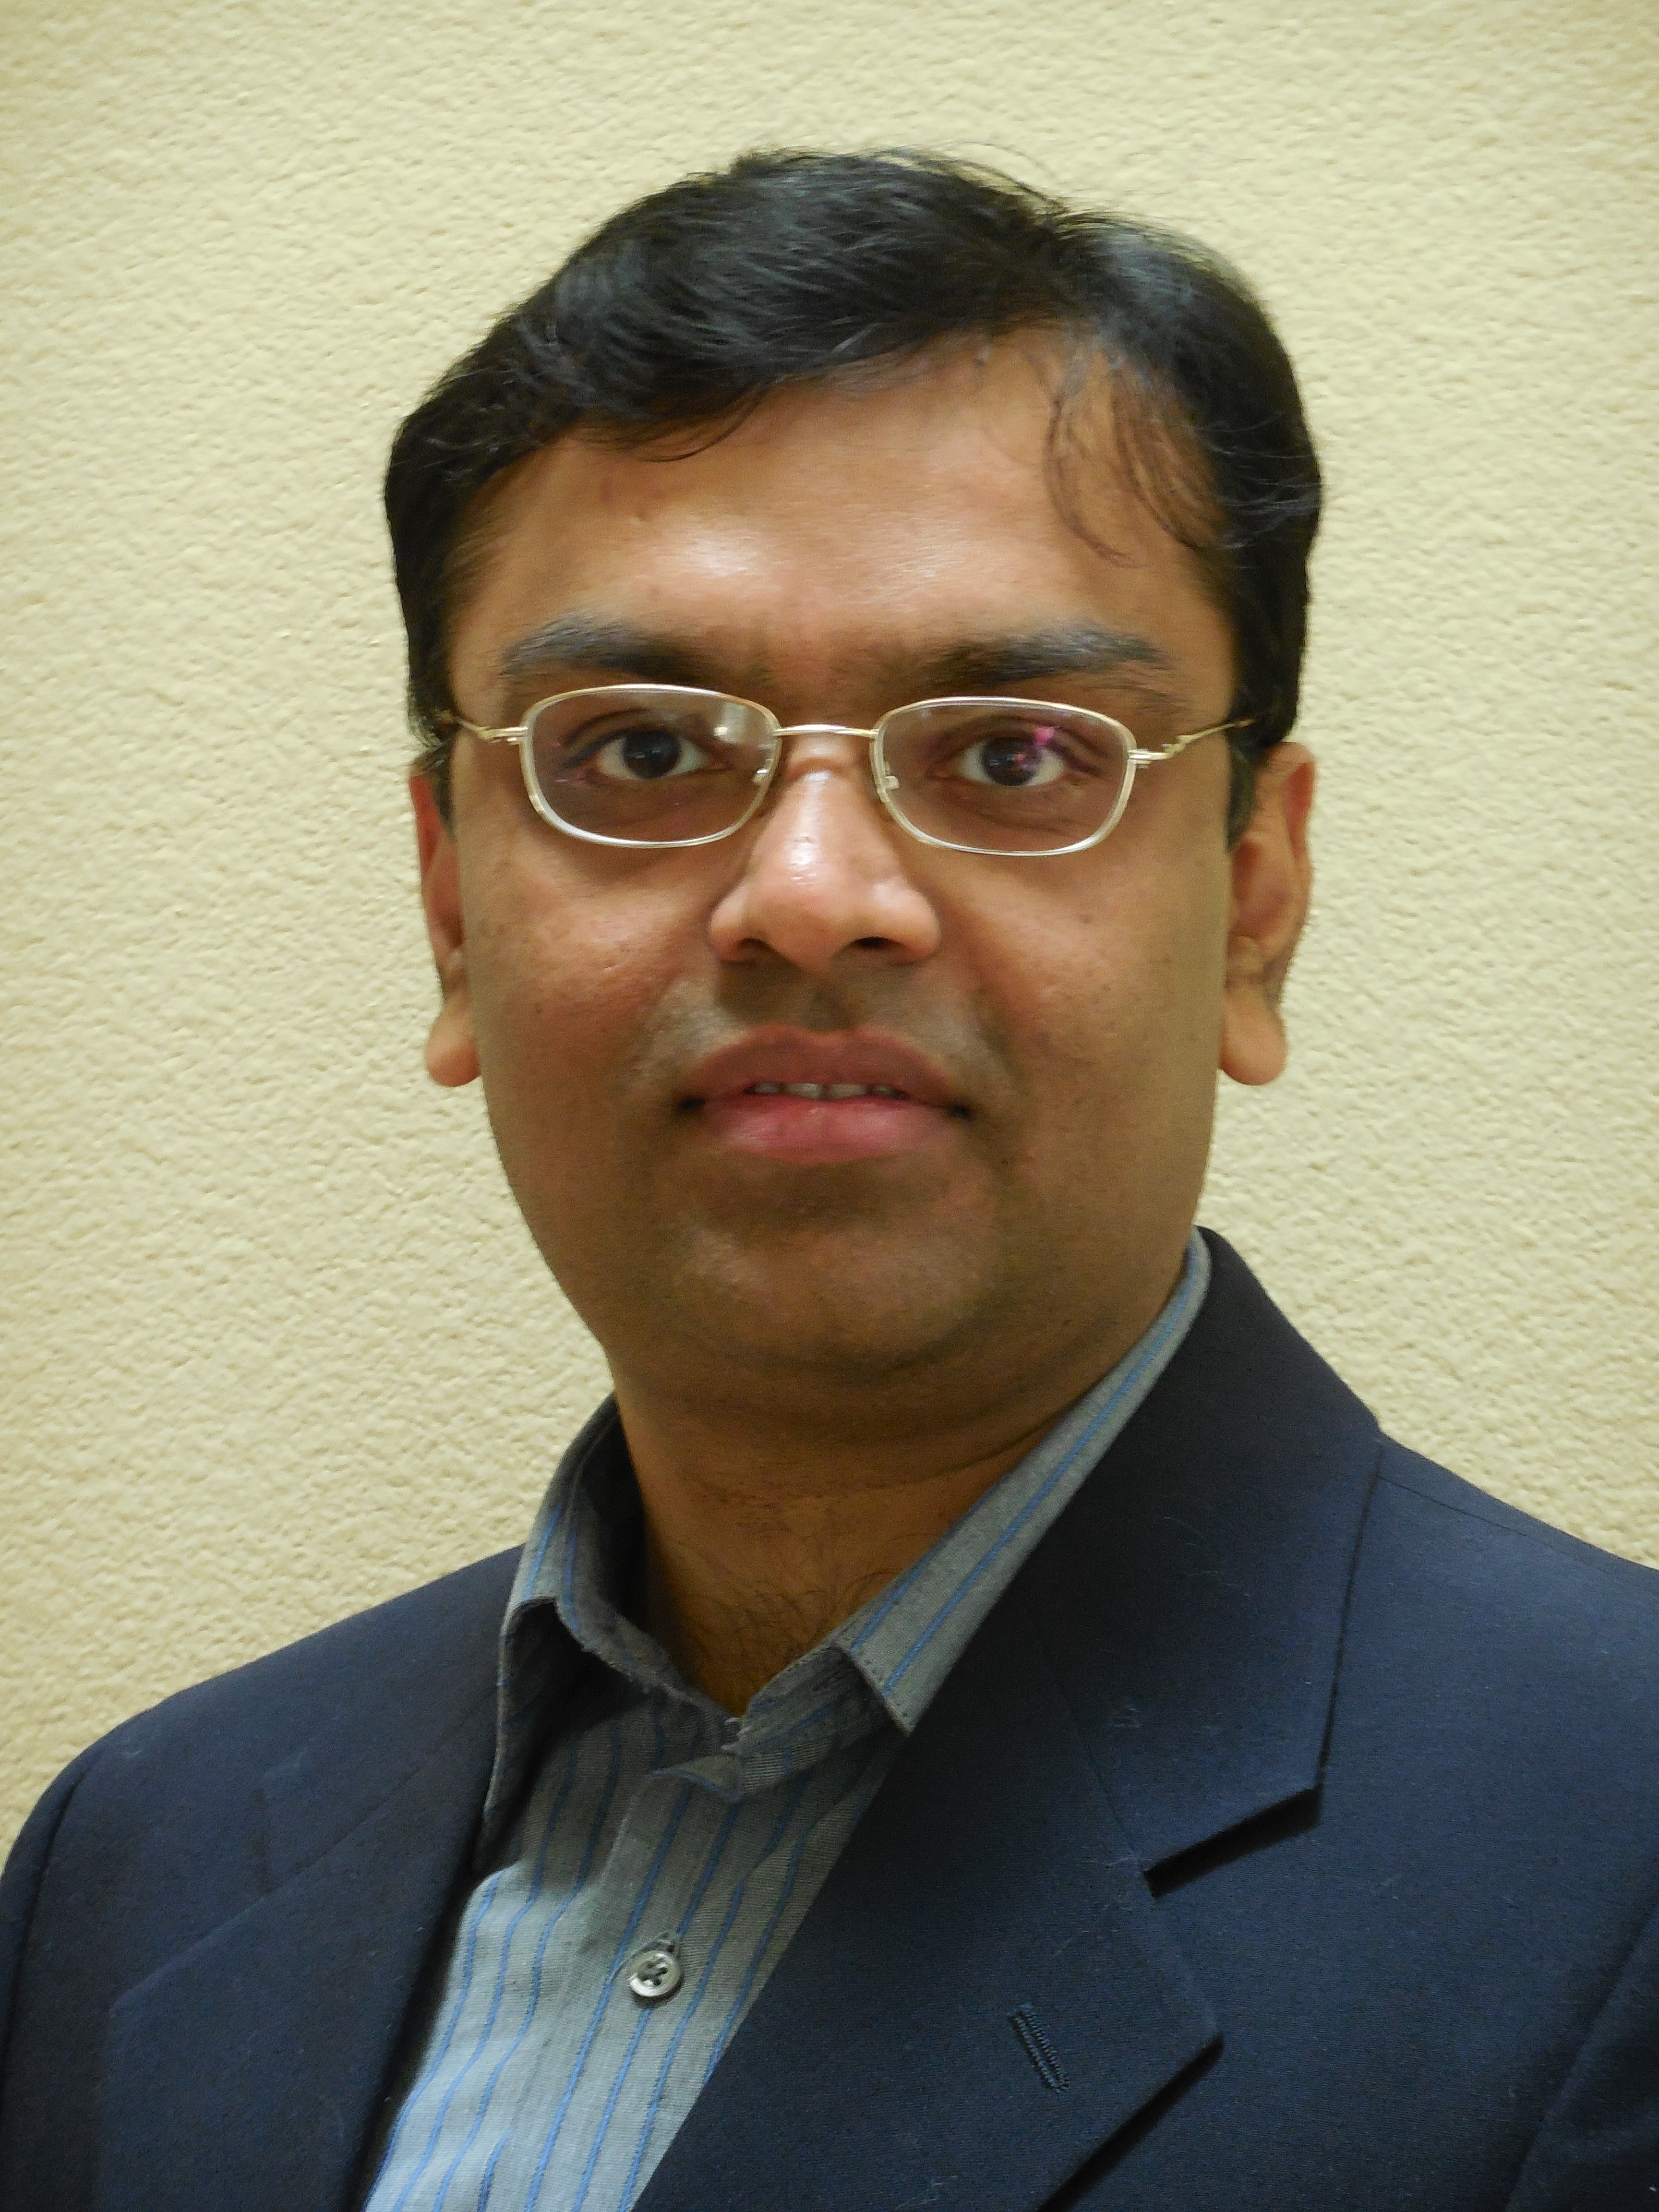 Mehul Shah is a principal architect with T-Mobile USA in the Network Technology group - t-mobile-mehul-shah